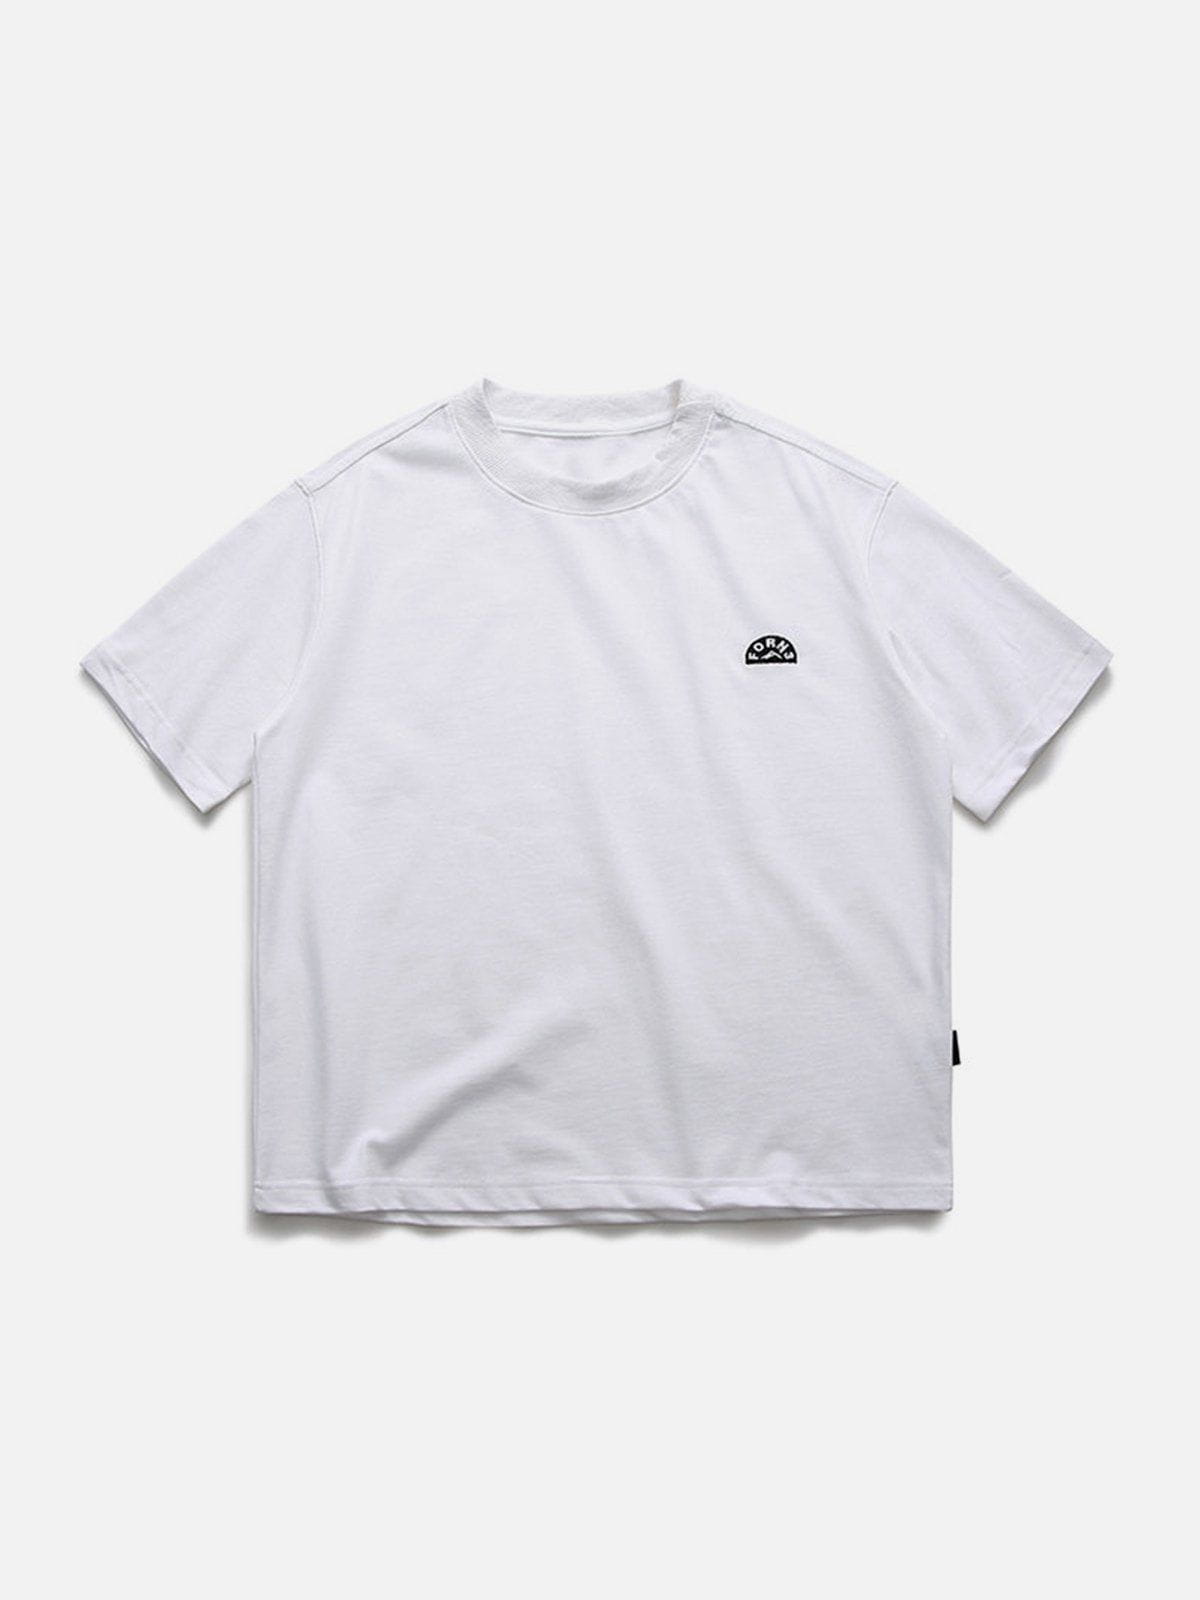 Sneakerland™ - Solid Embroidery Semicircle Letter Tee